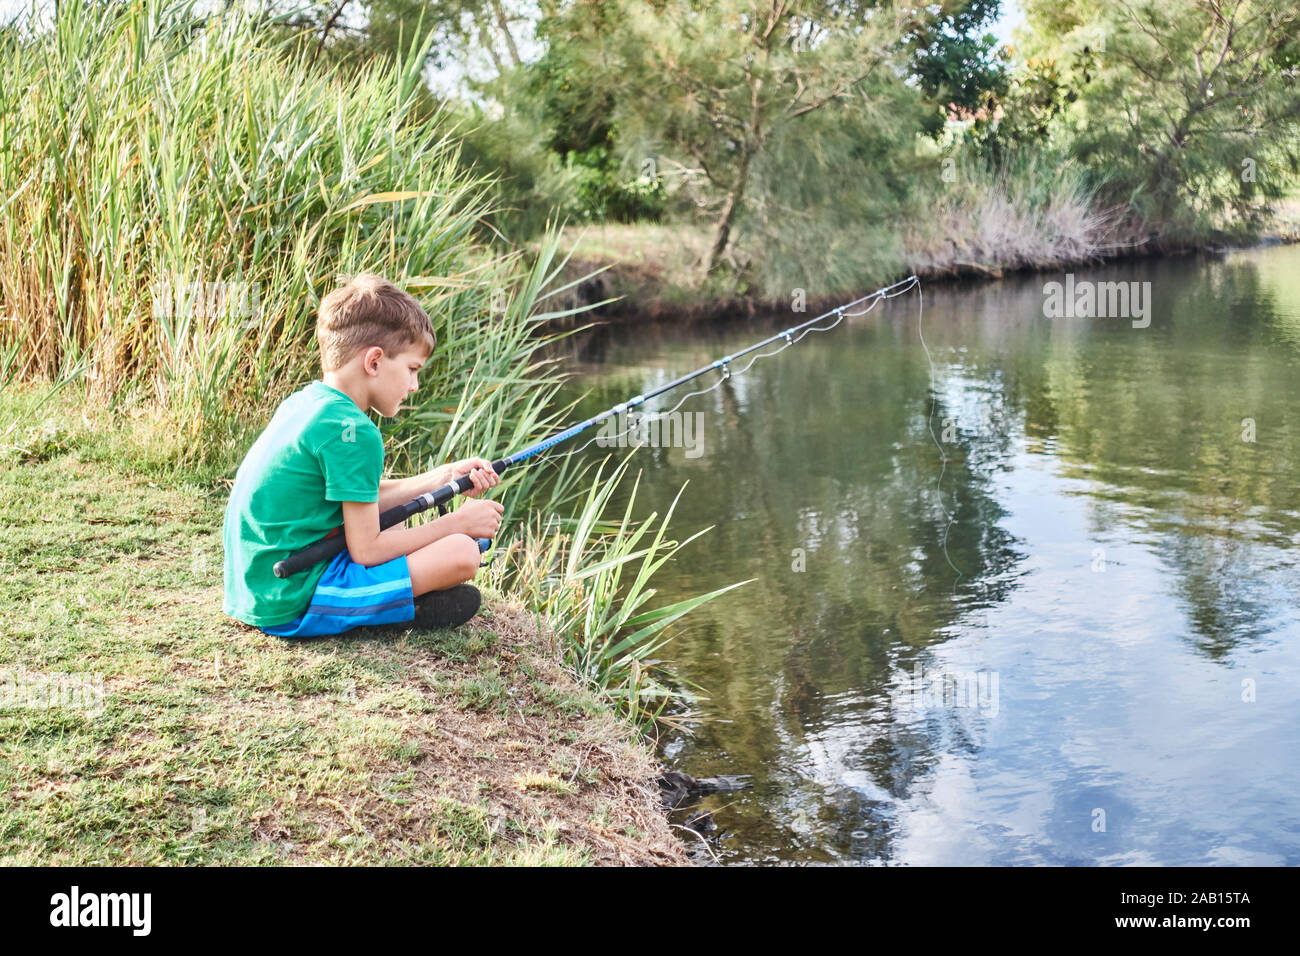 Young person, boy aged 6, sitting with legs crossed fishing from the bank of a pond in Queensland Australia.. Stock Photo